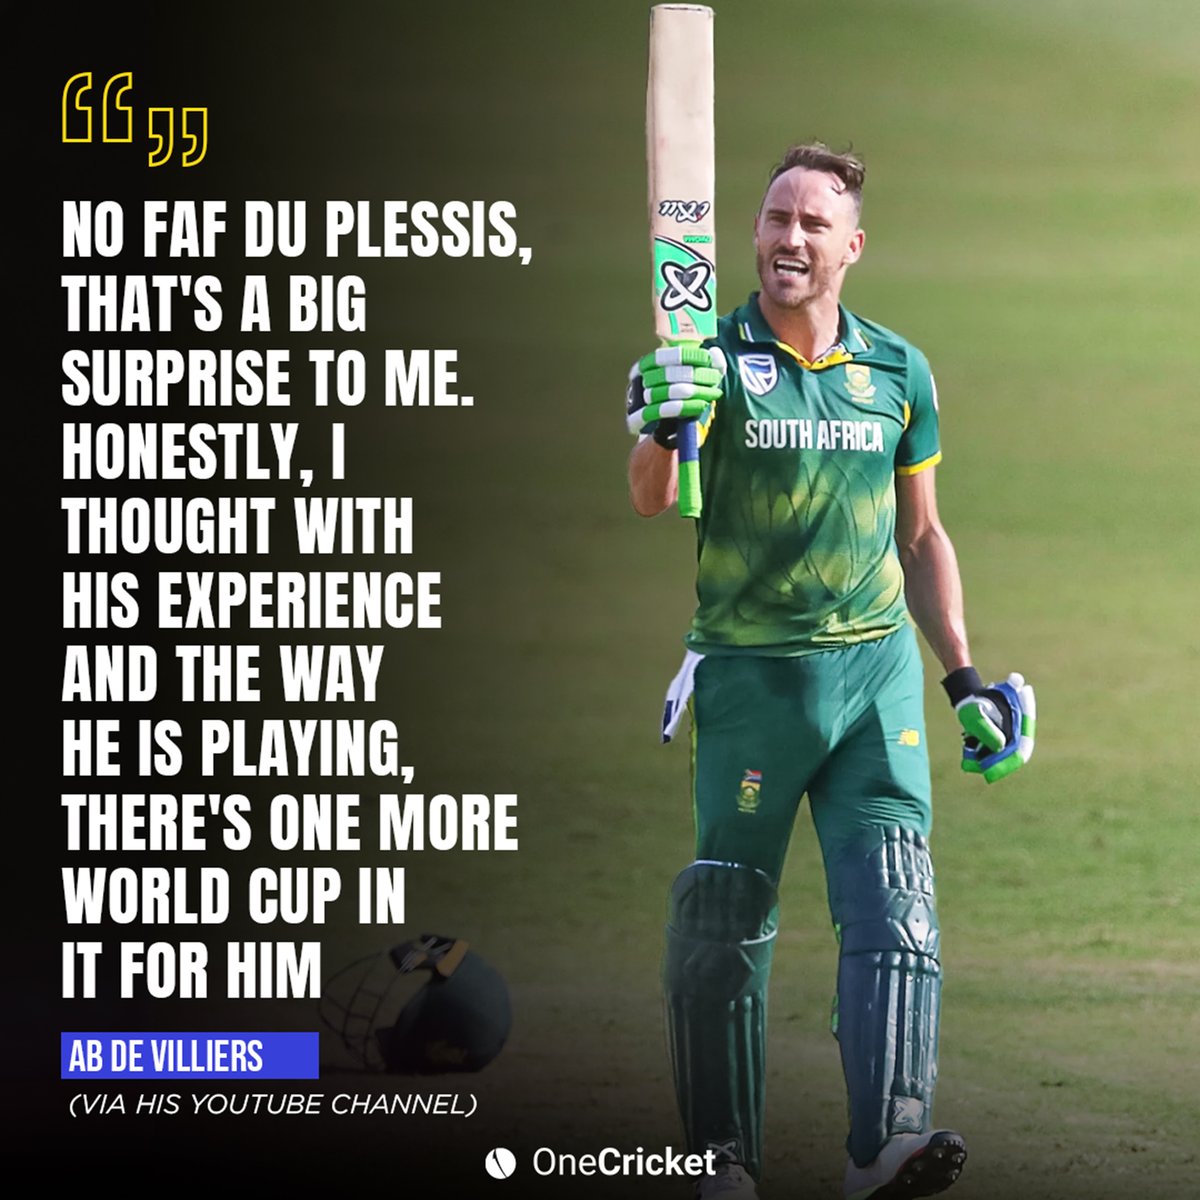 AB de Villiers voiced his surprise at the decision to leave Faf du Plessis out of the Proteas' T20 World Cup squad 👀

#T20WorldCup24 #FafduPlessis